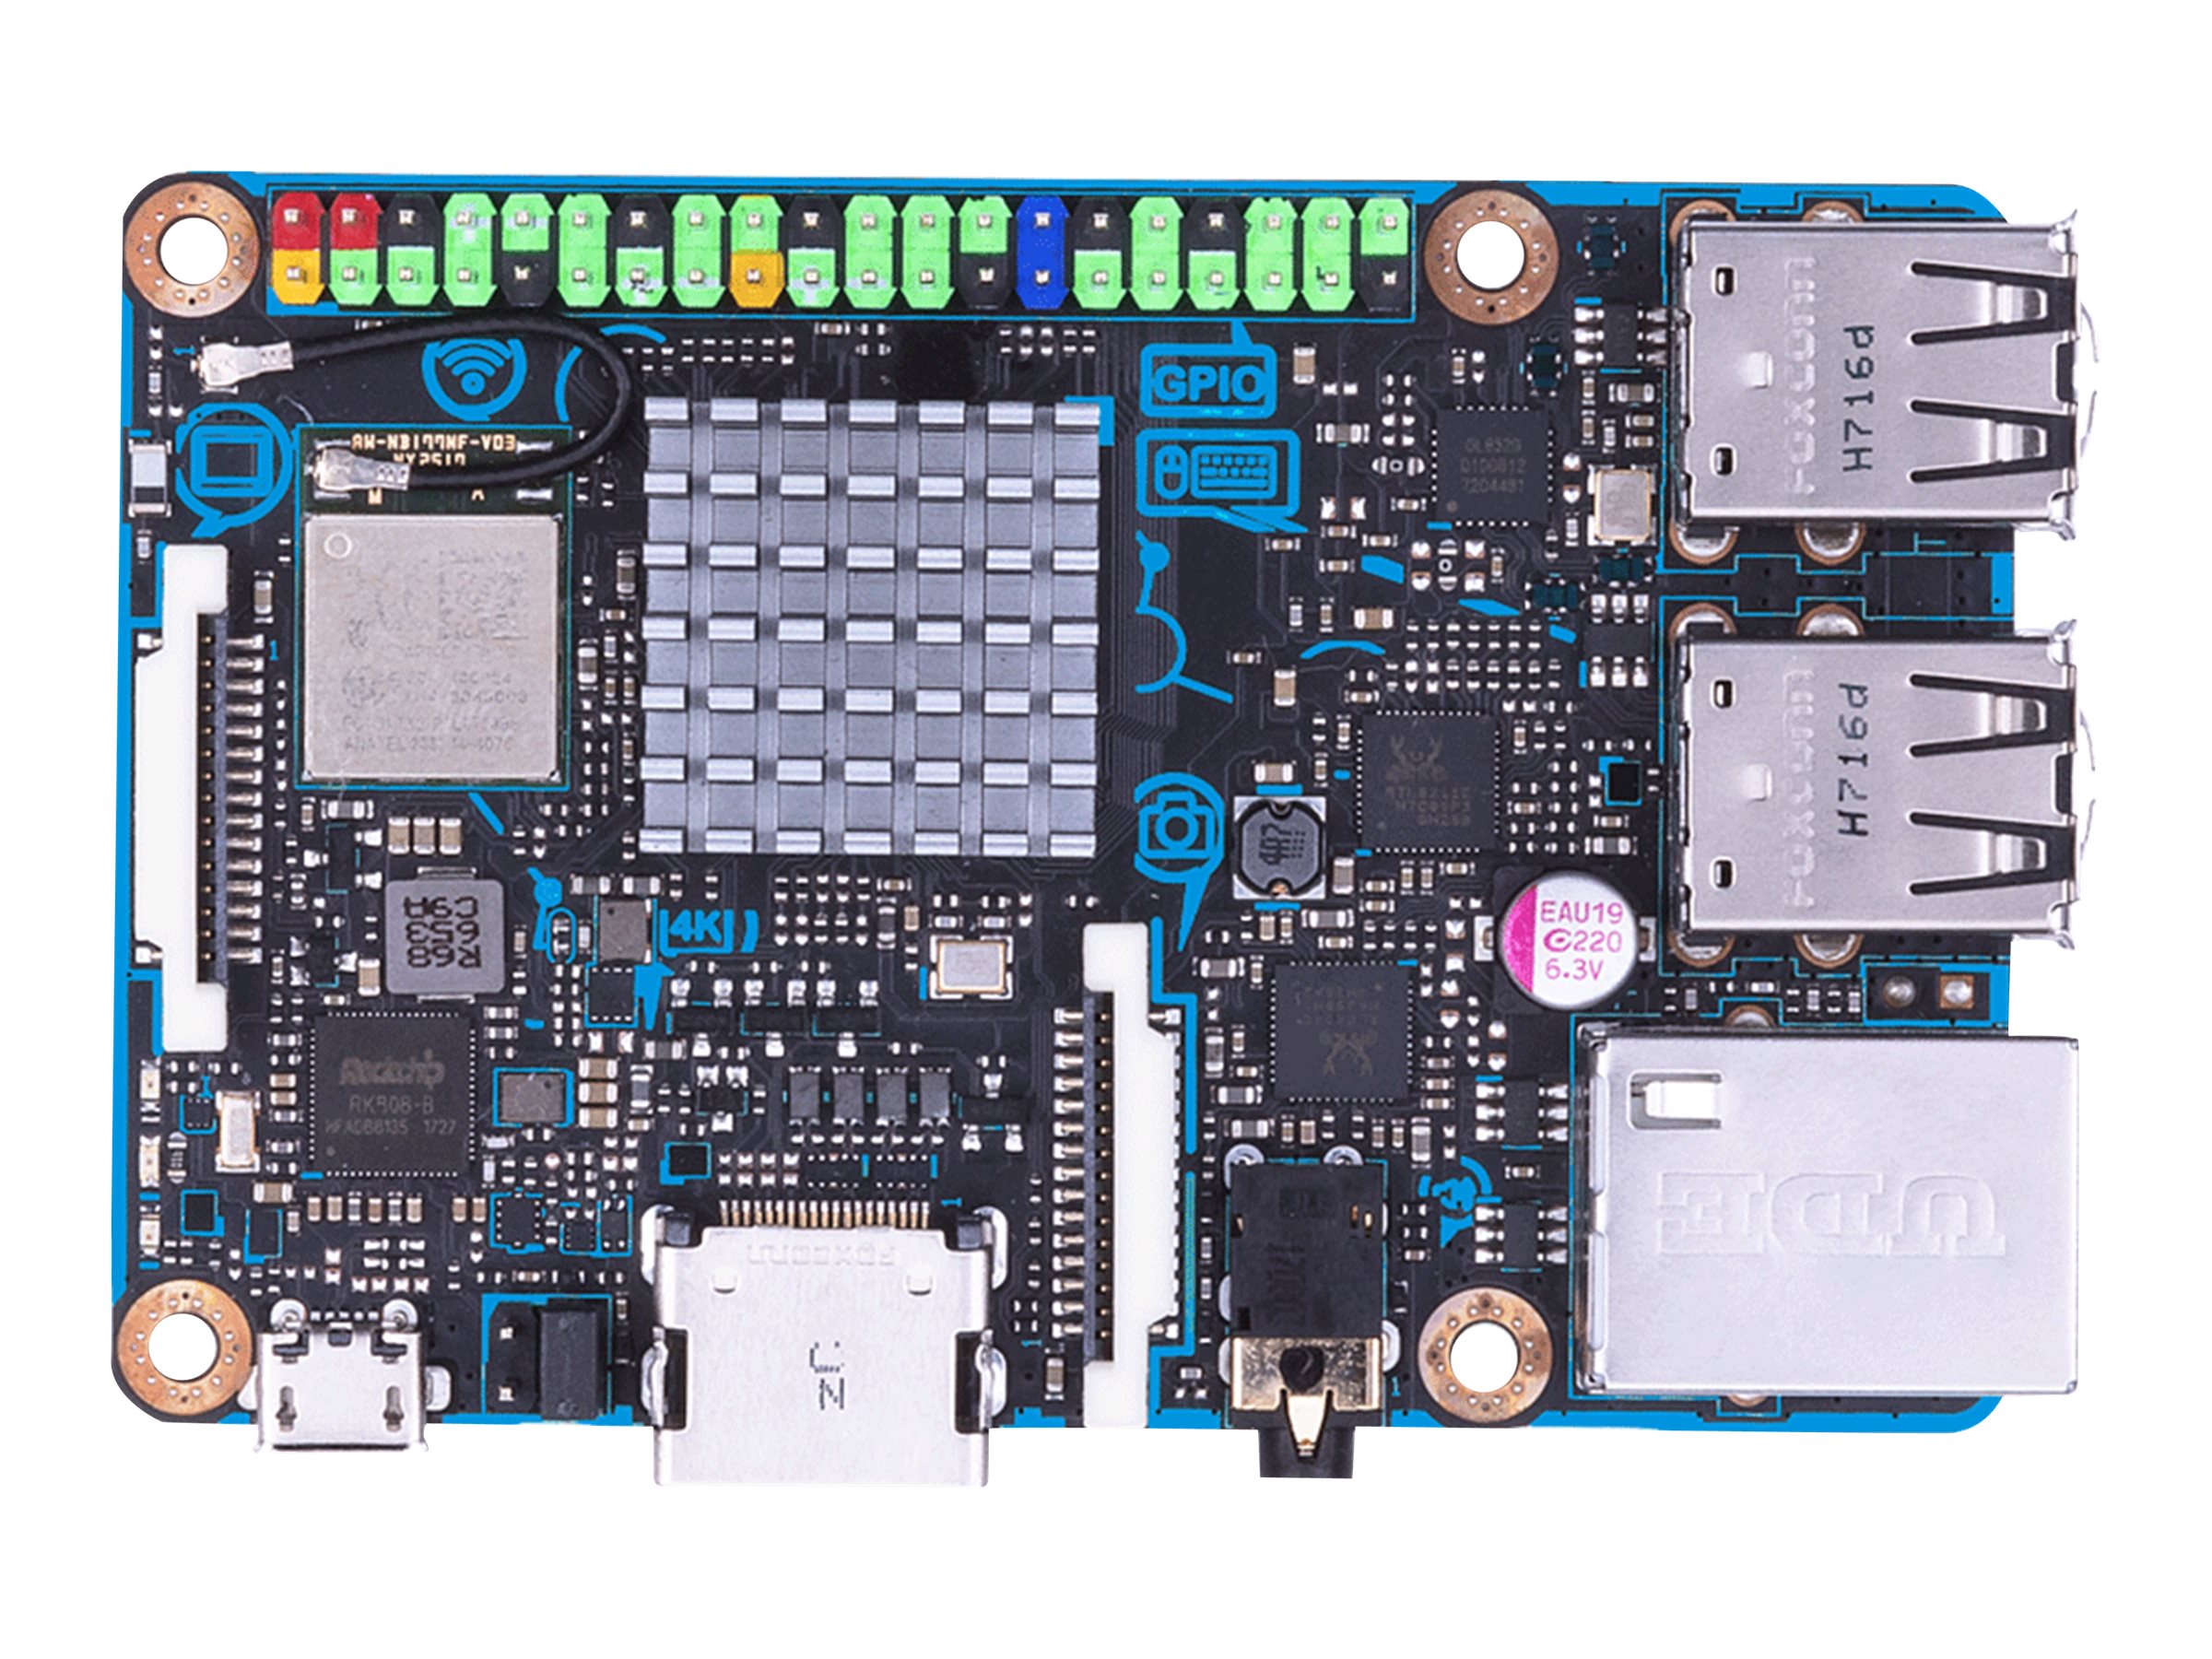 ASUS TINKER BOARD S R2.0/A/2G/16G